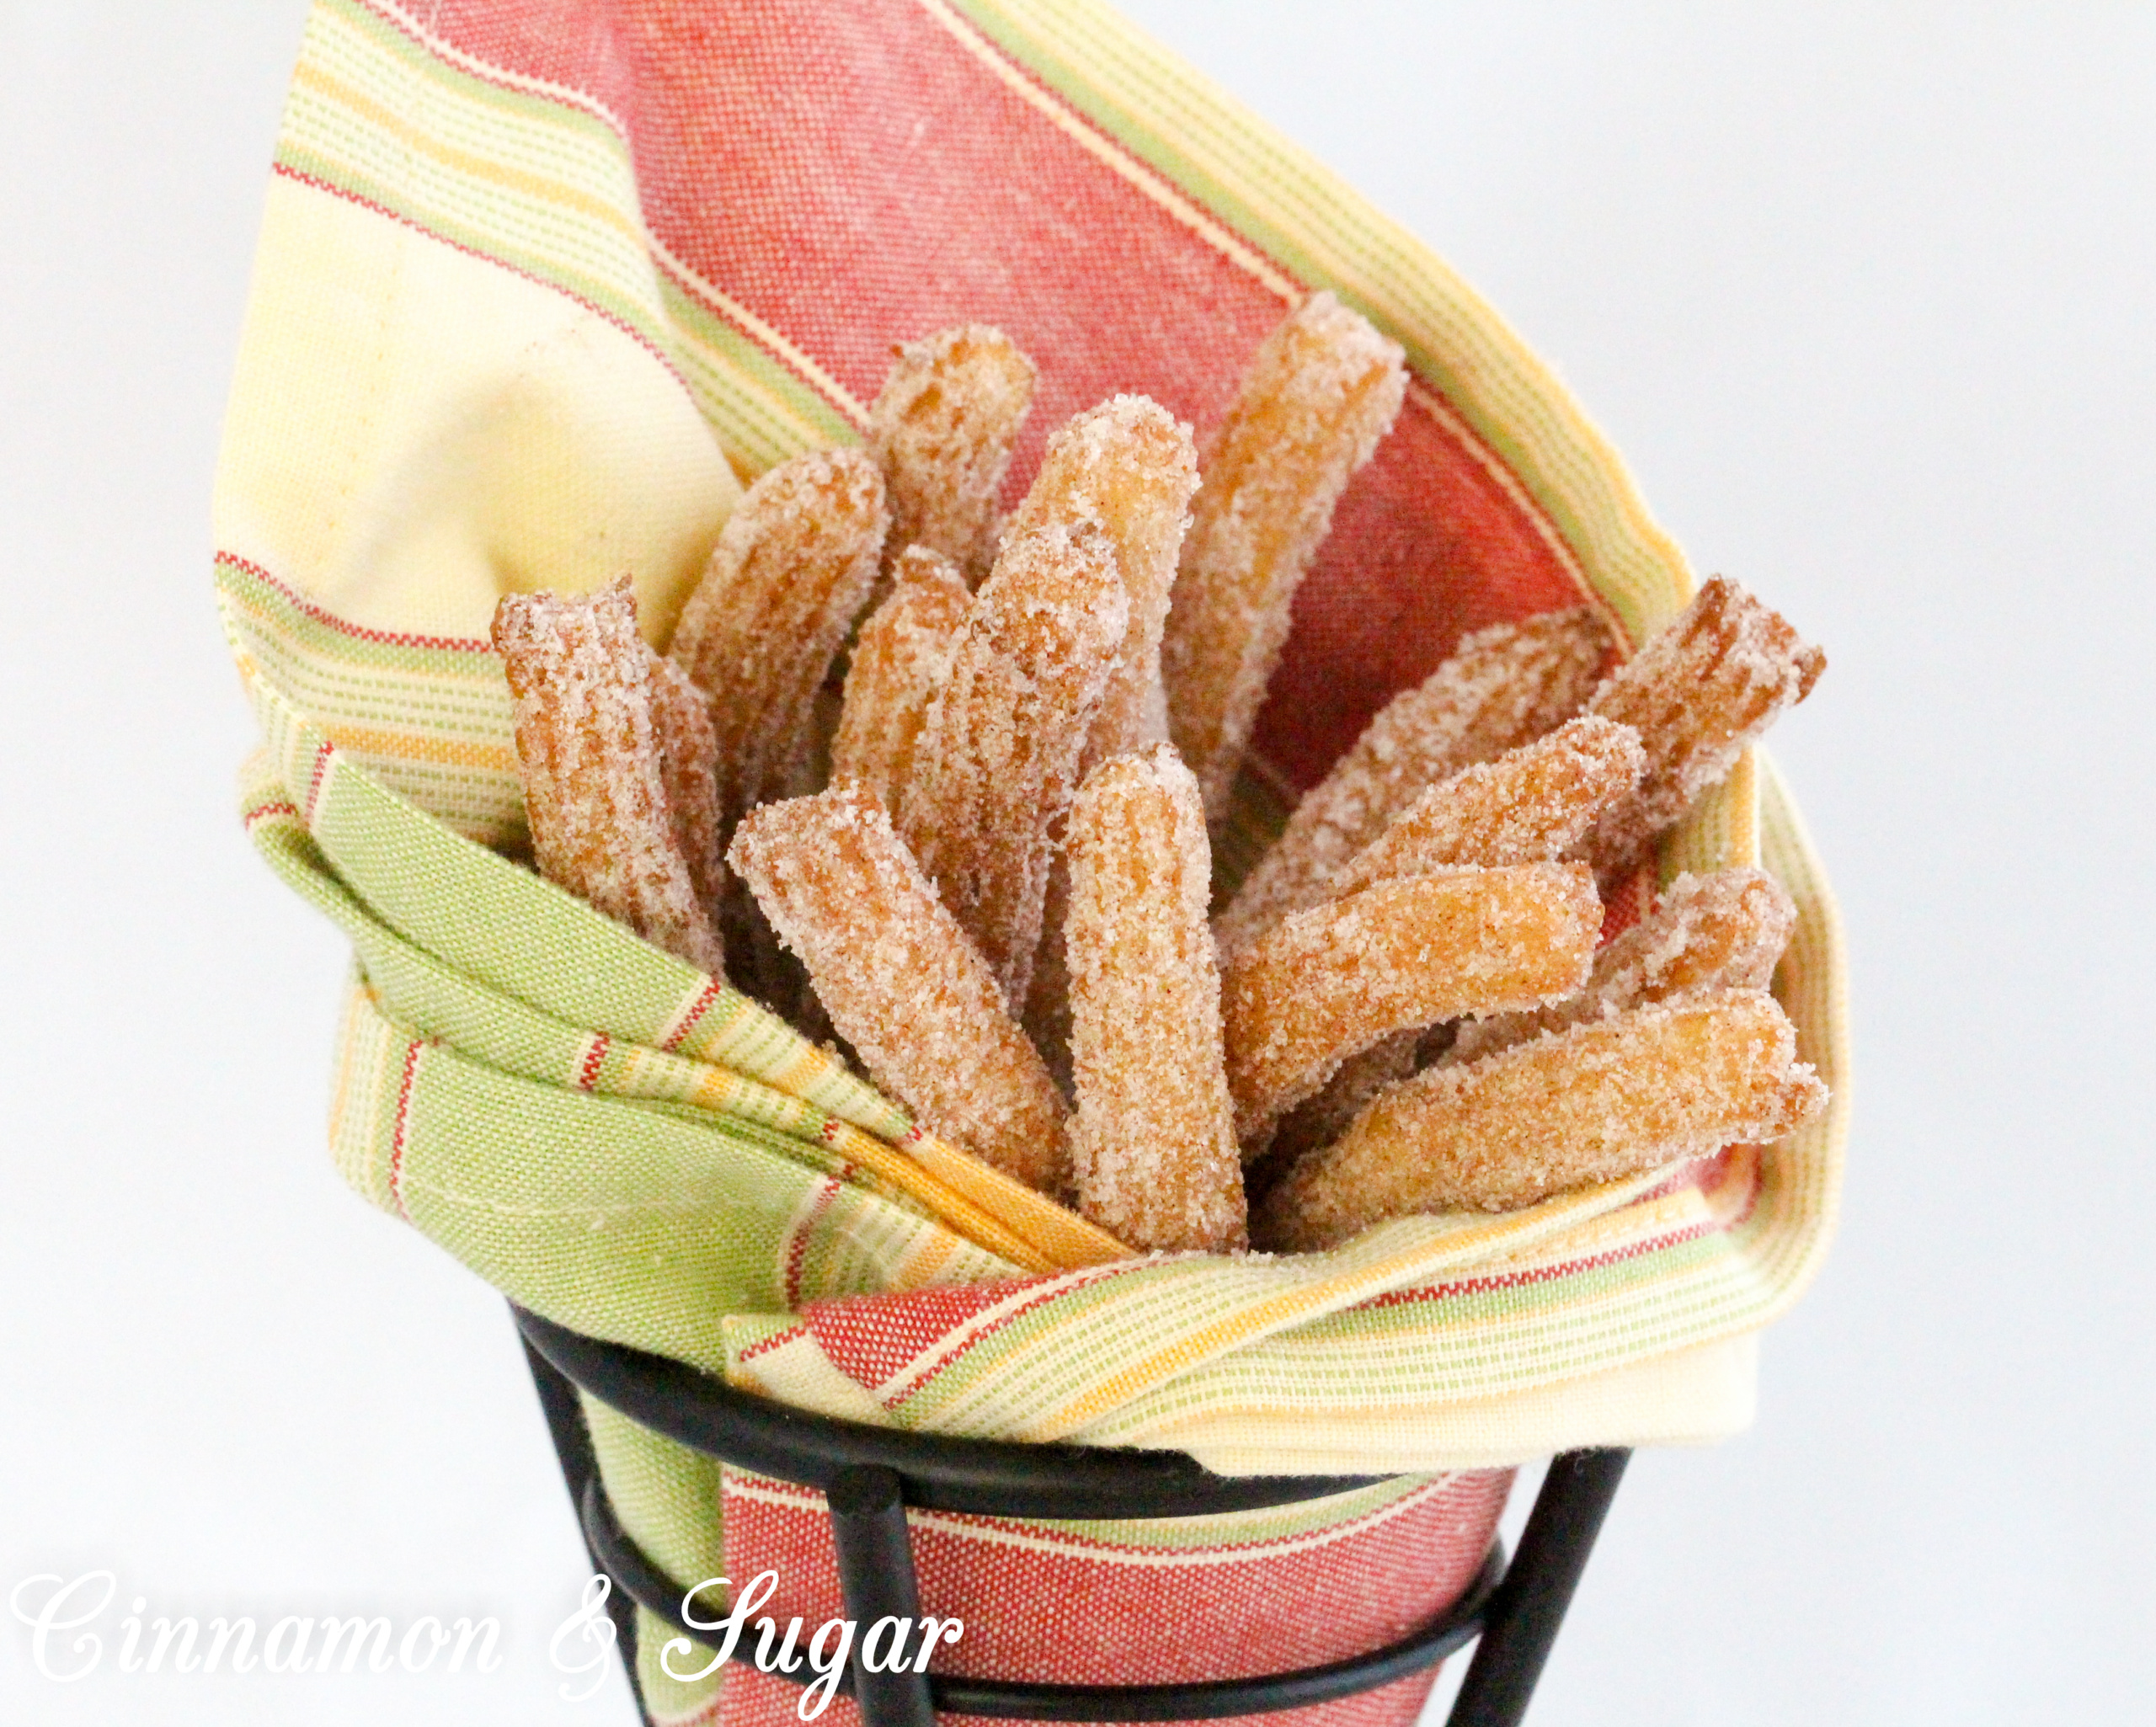 It's not that difficult to make fresh, hot from the skillet, churros. Rolled in cinnamon and sugar, and then served with warm Mexican chocolate dipping sauce, this dessert is a scrumptious treat! Recipe shared with permission granted by S.C. Perkins, author of LINEAGE MOST LETHAL. 